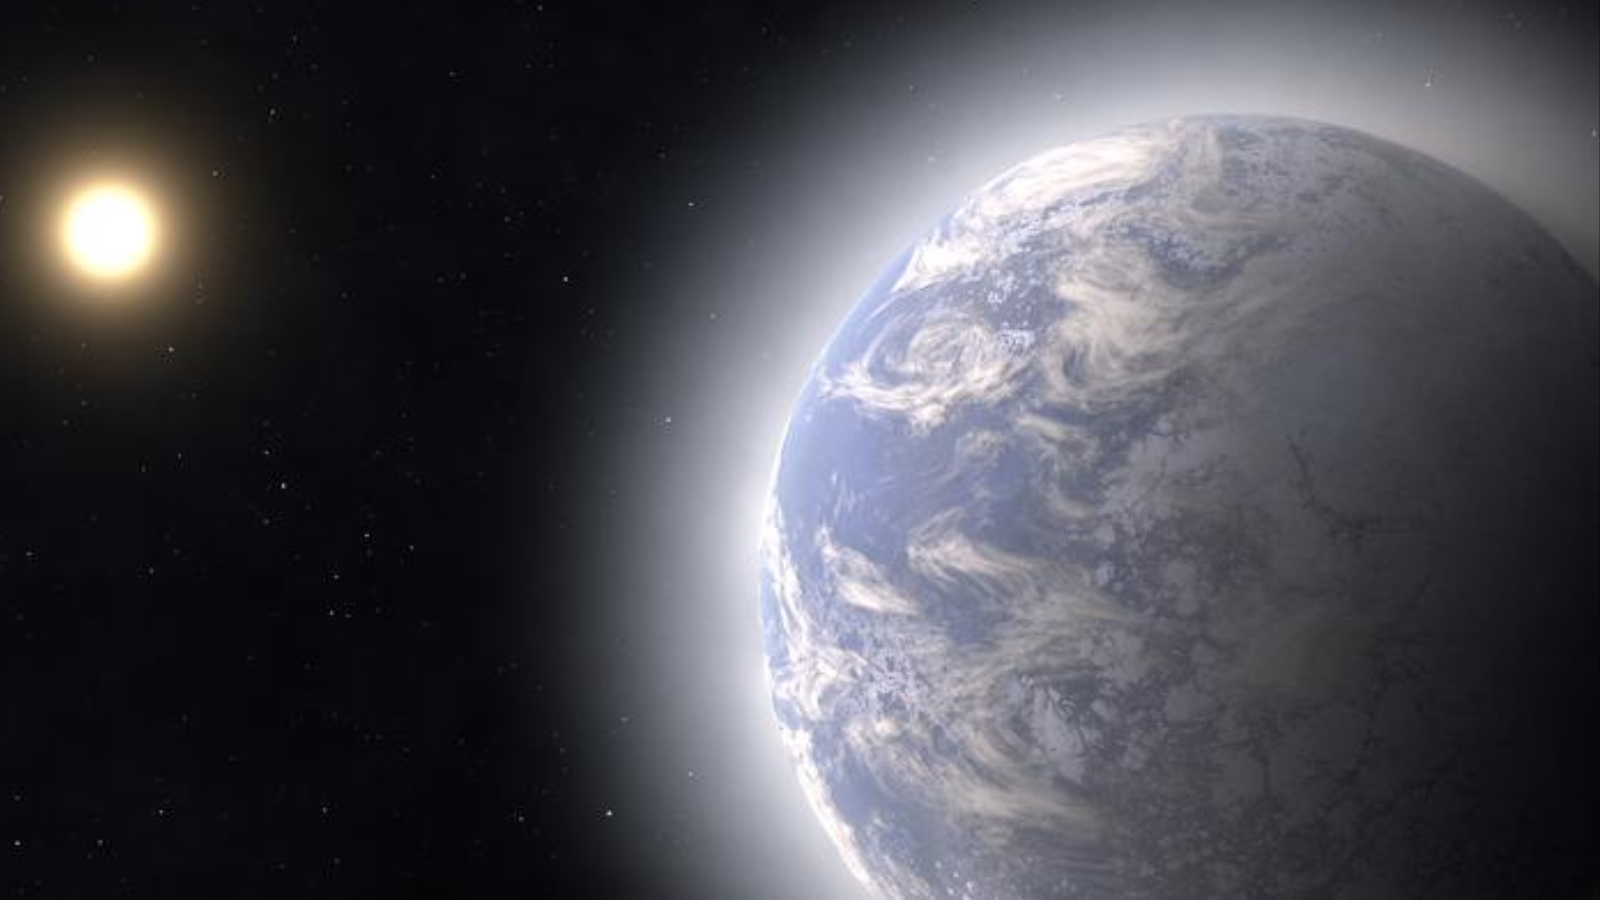 The mystery of the missing super-Earths and mini-Neptunes may finally be solved